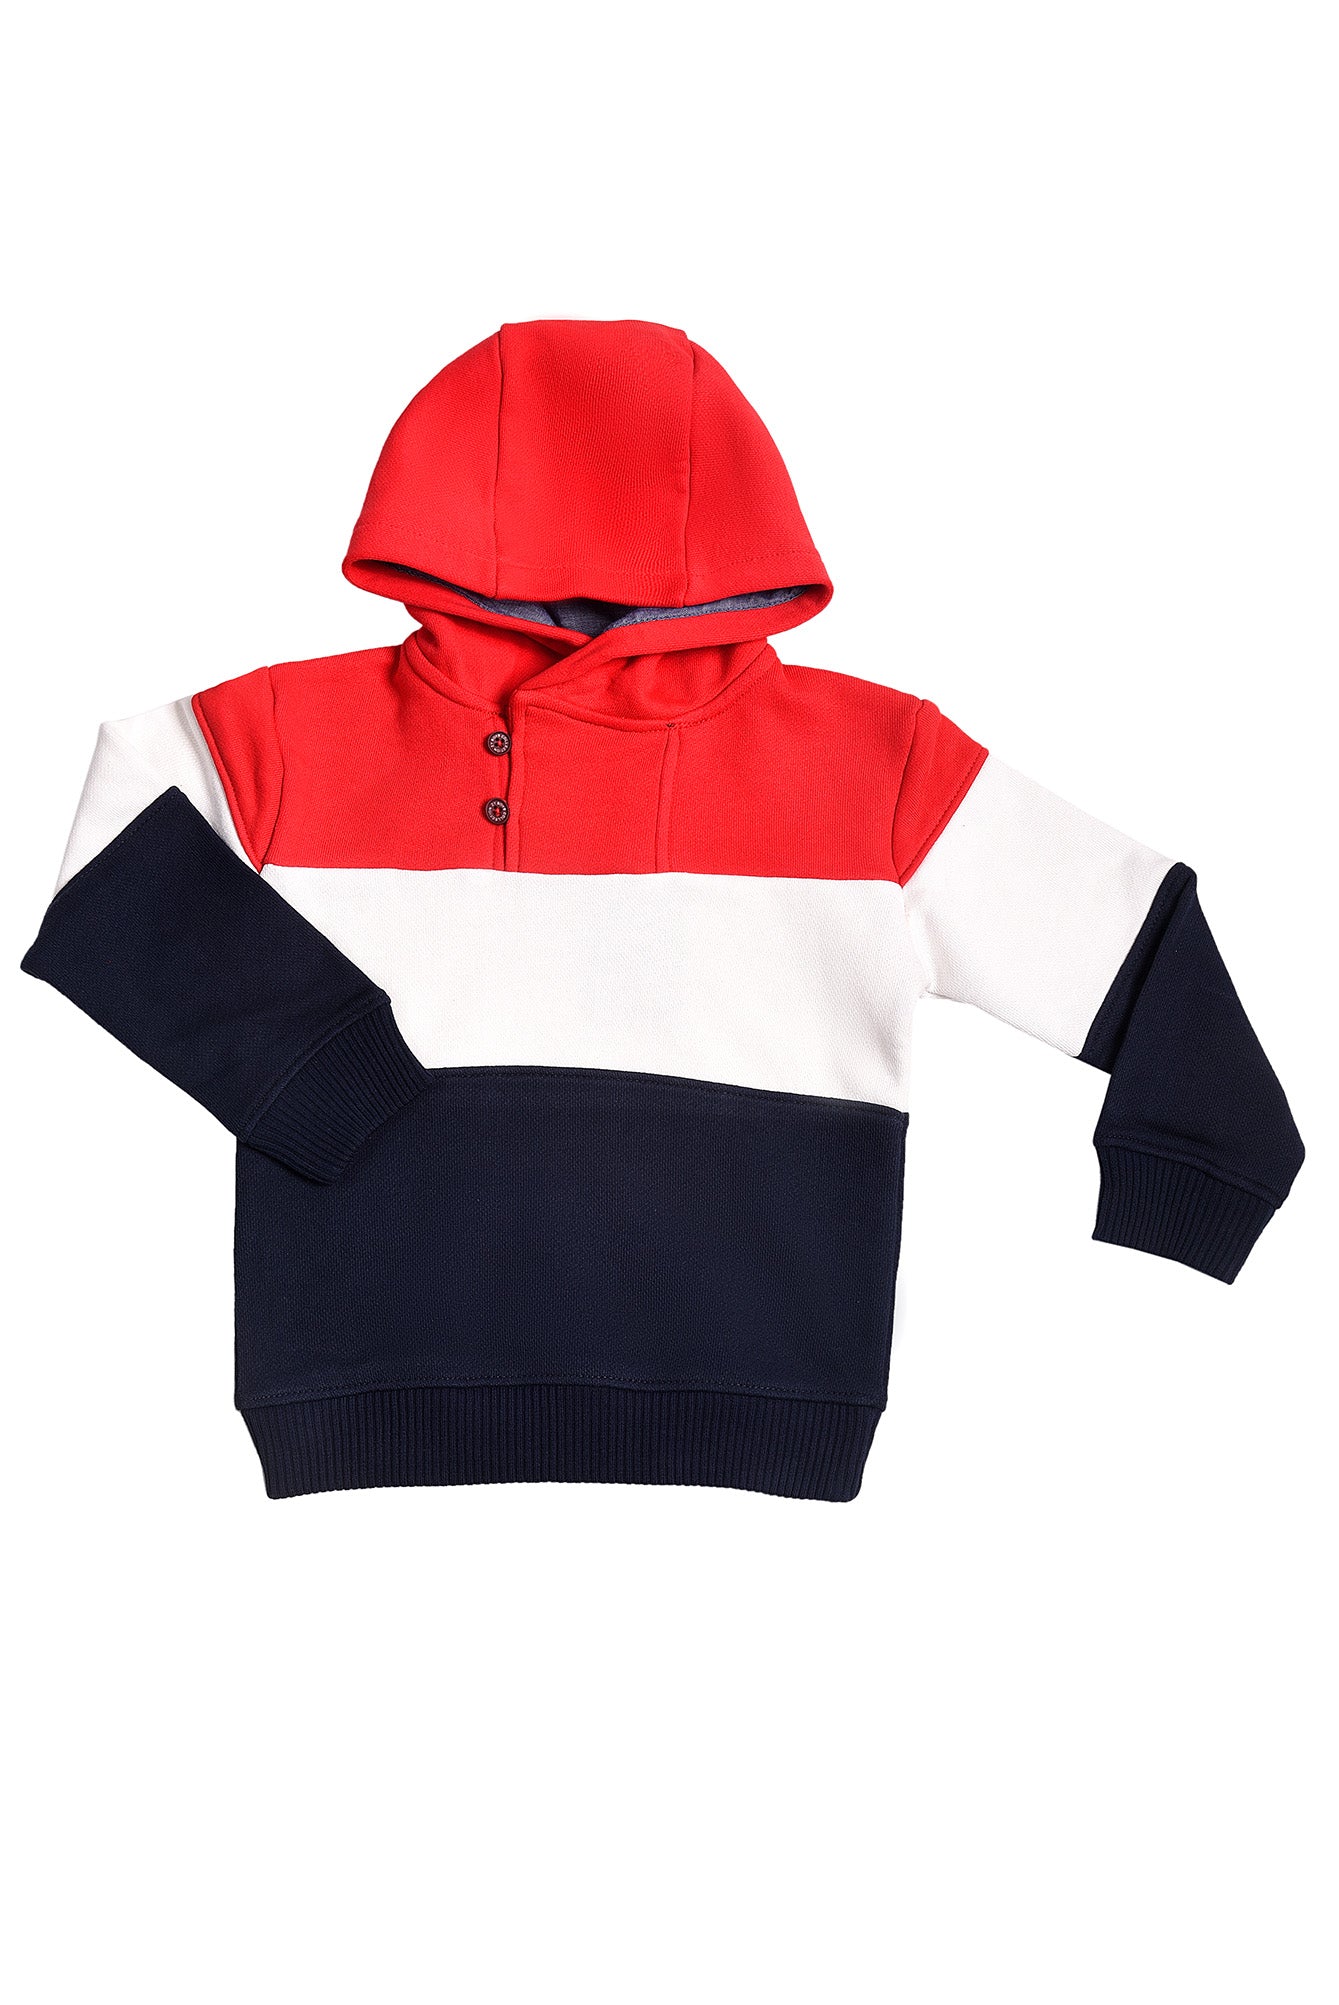 KDS-BC-13159 PULL OVER HOODIE RED STRIPES